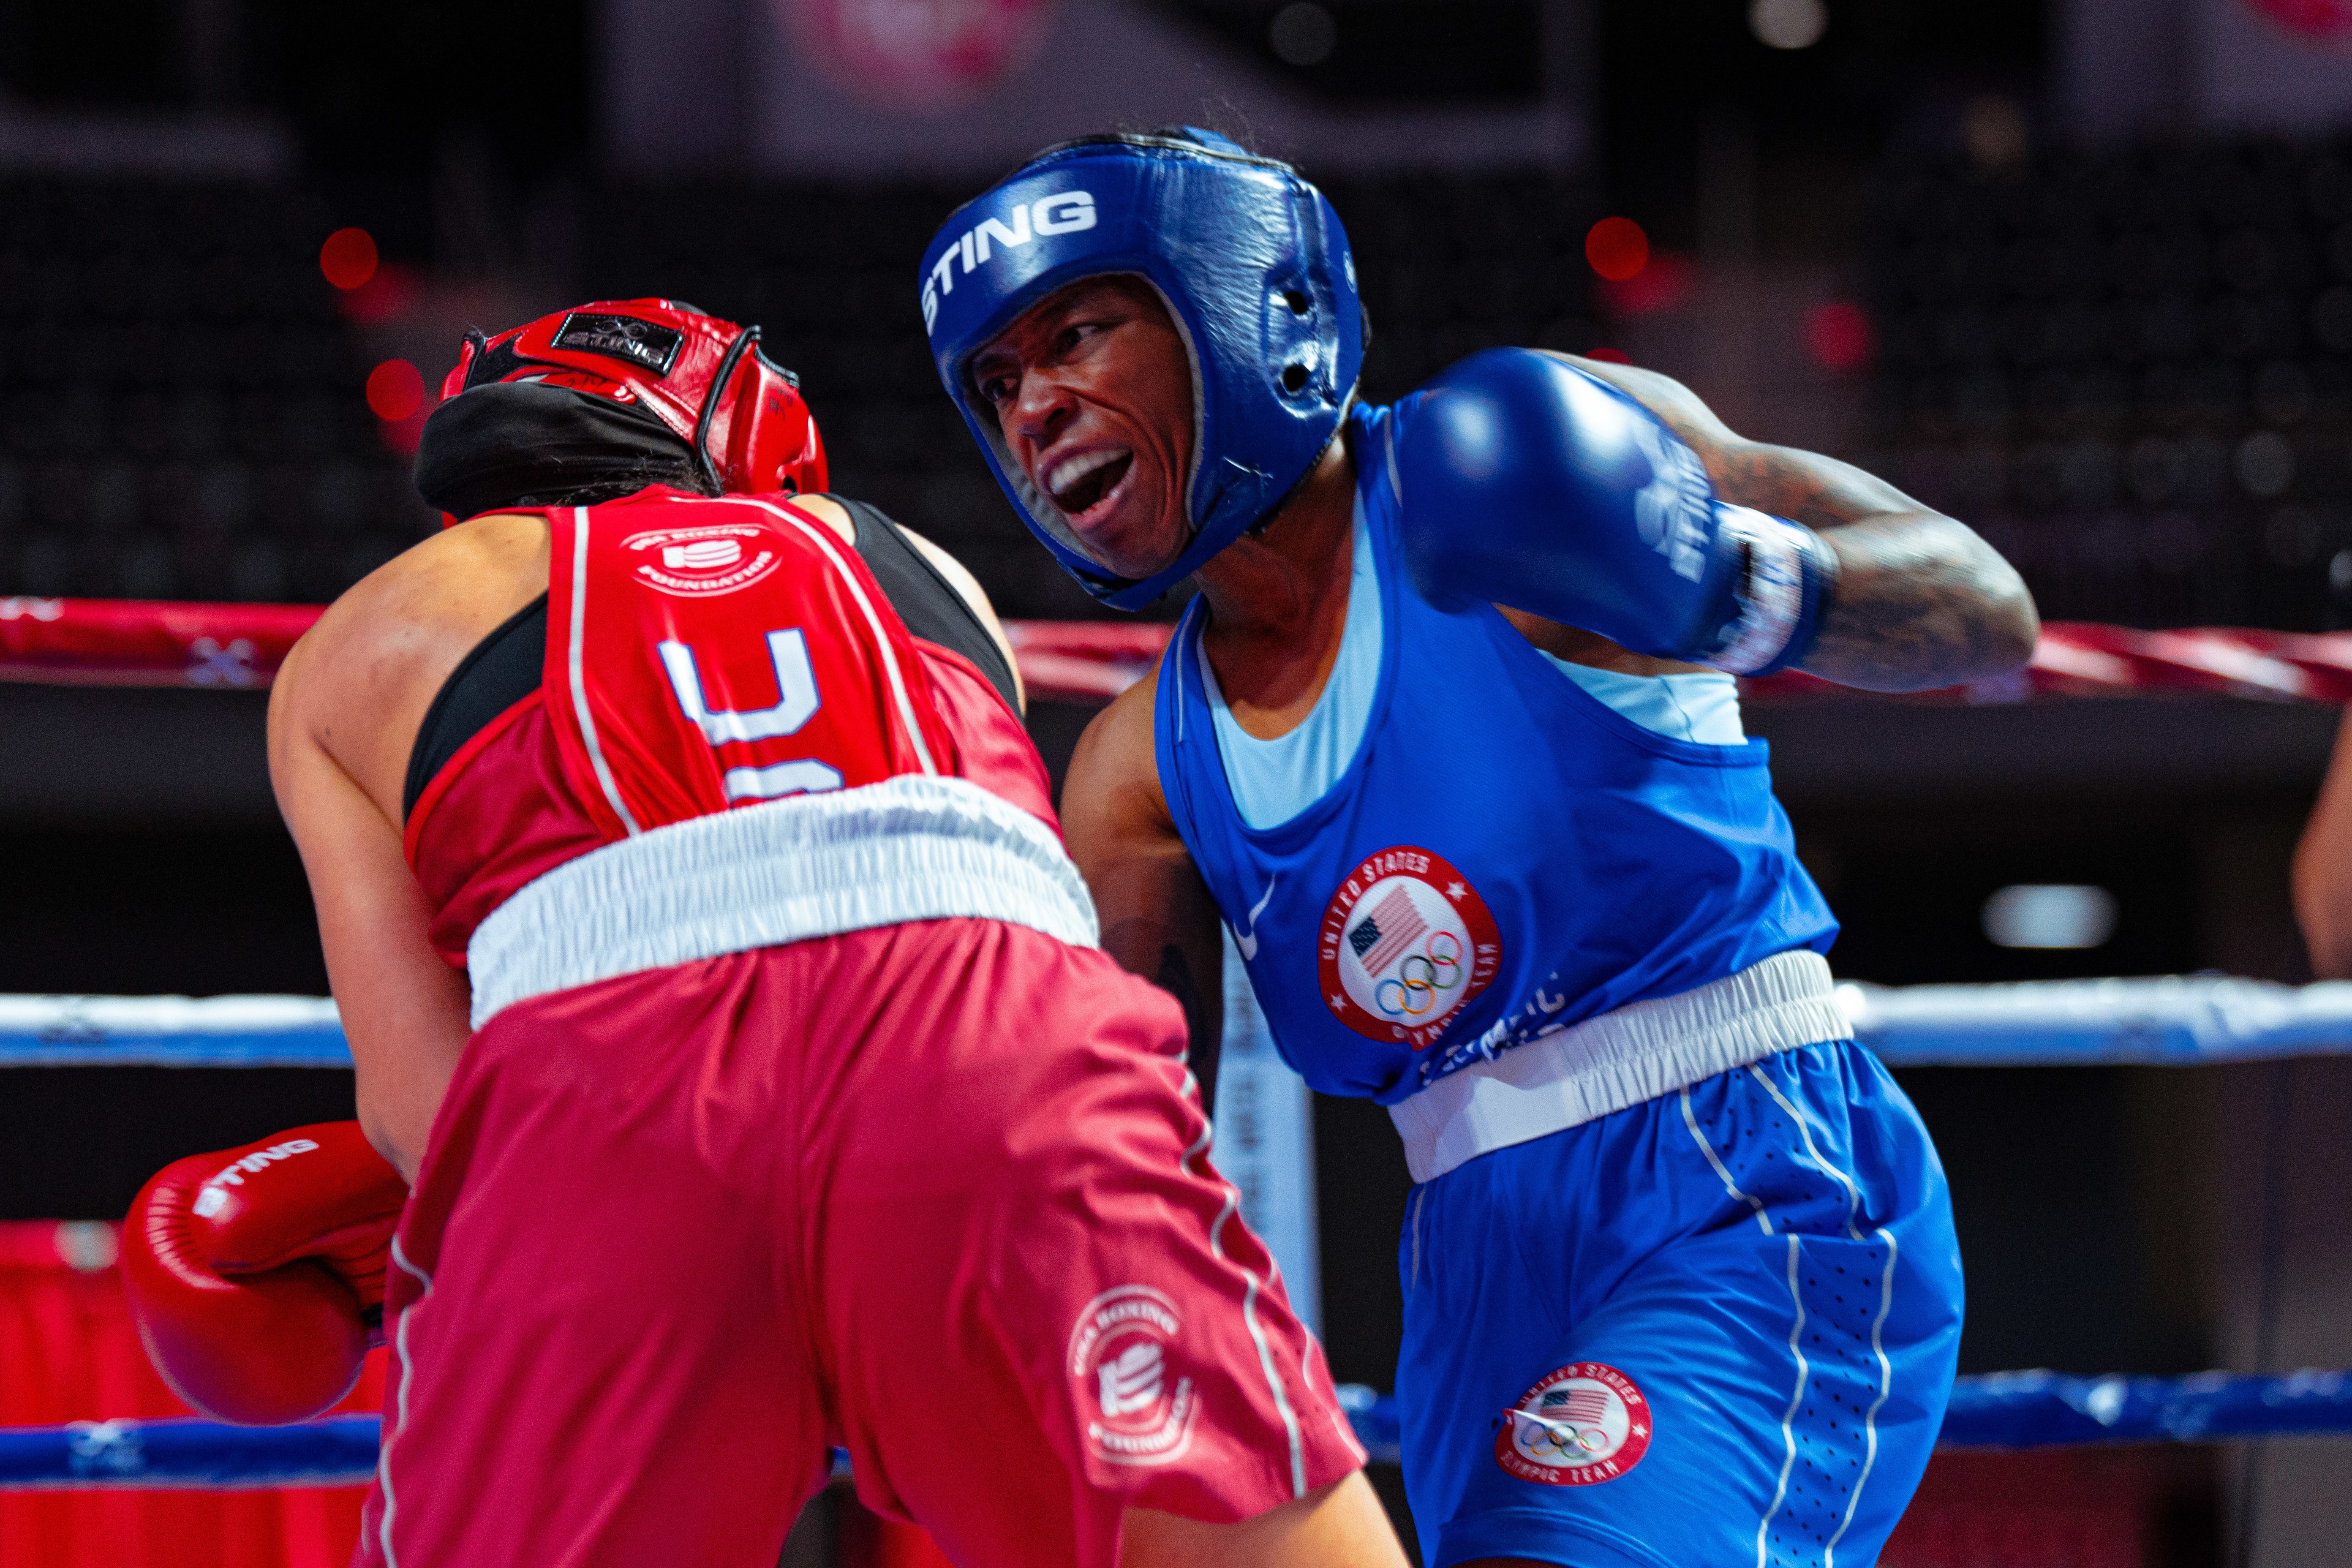 Two boxers engage during a bout at the U.S. Olympic Team Trials.